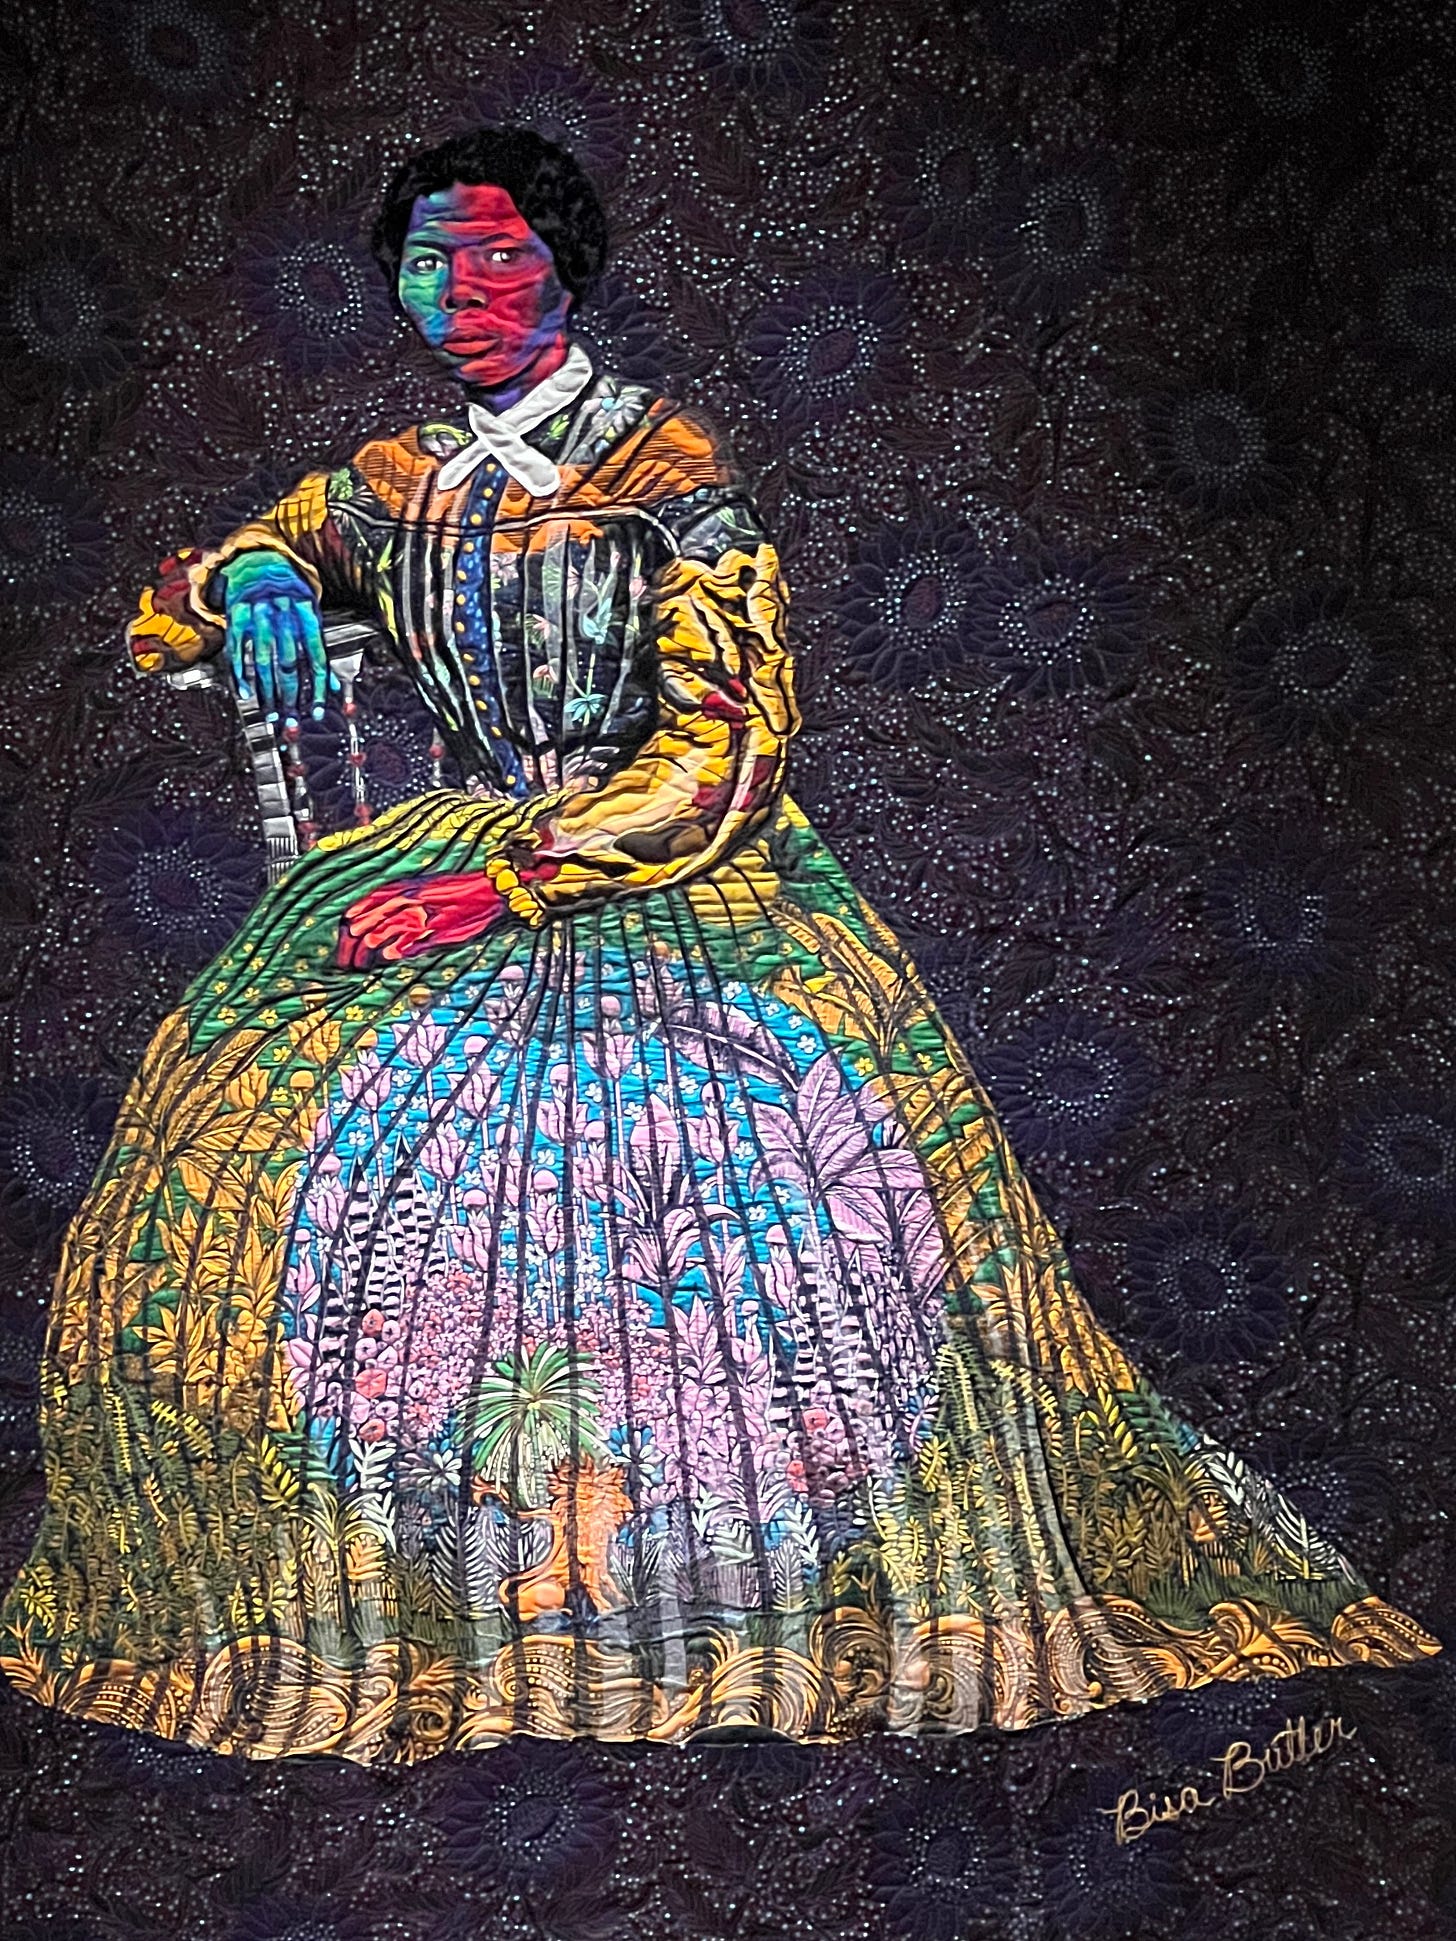 An image of Harriet Tubman shown in brightly colored quilted material.